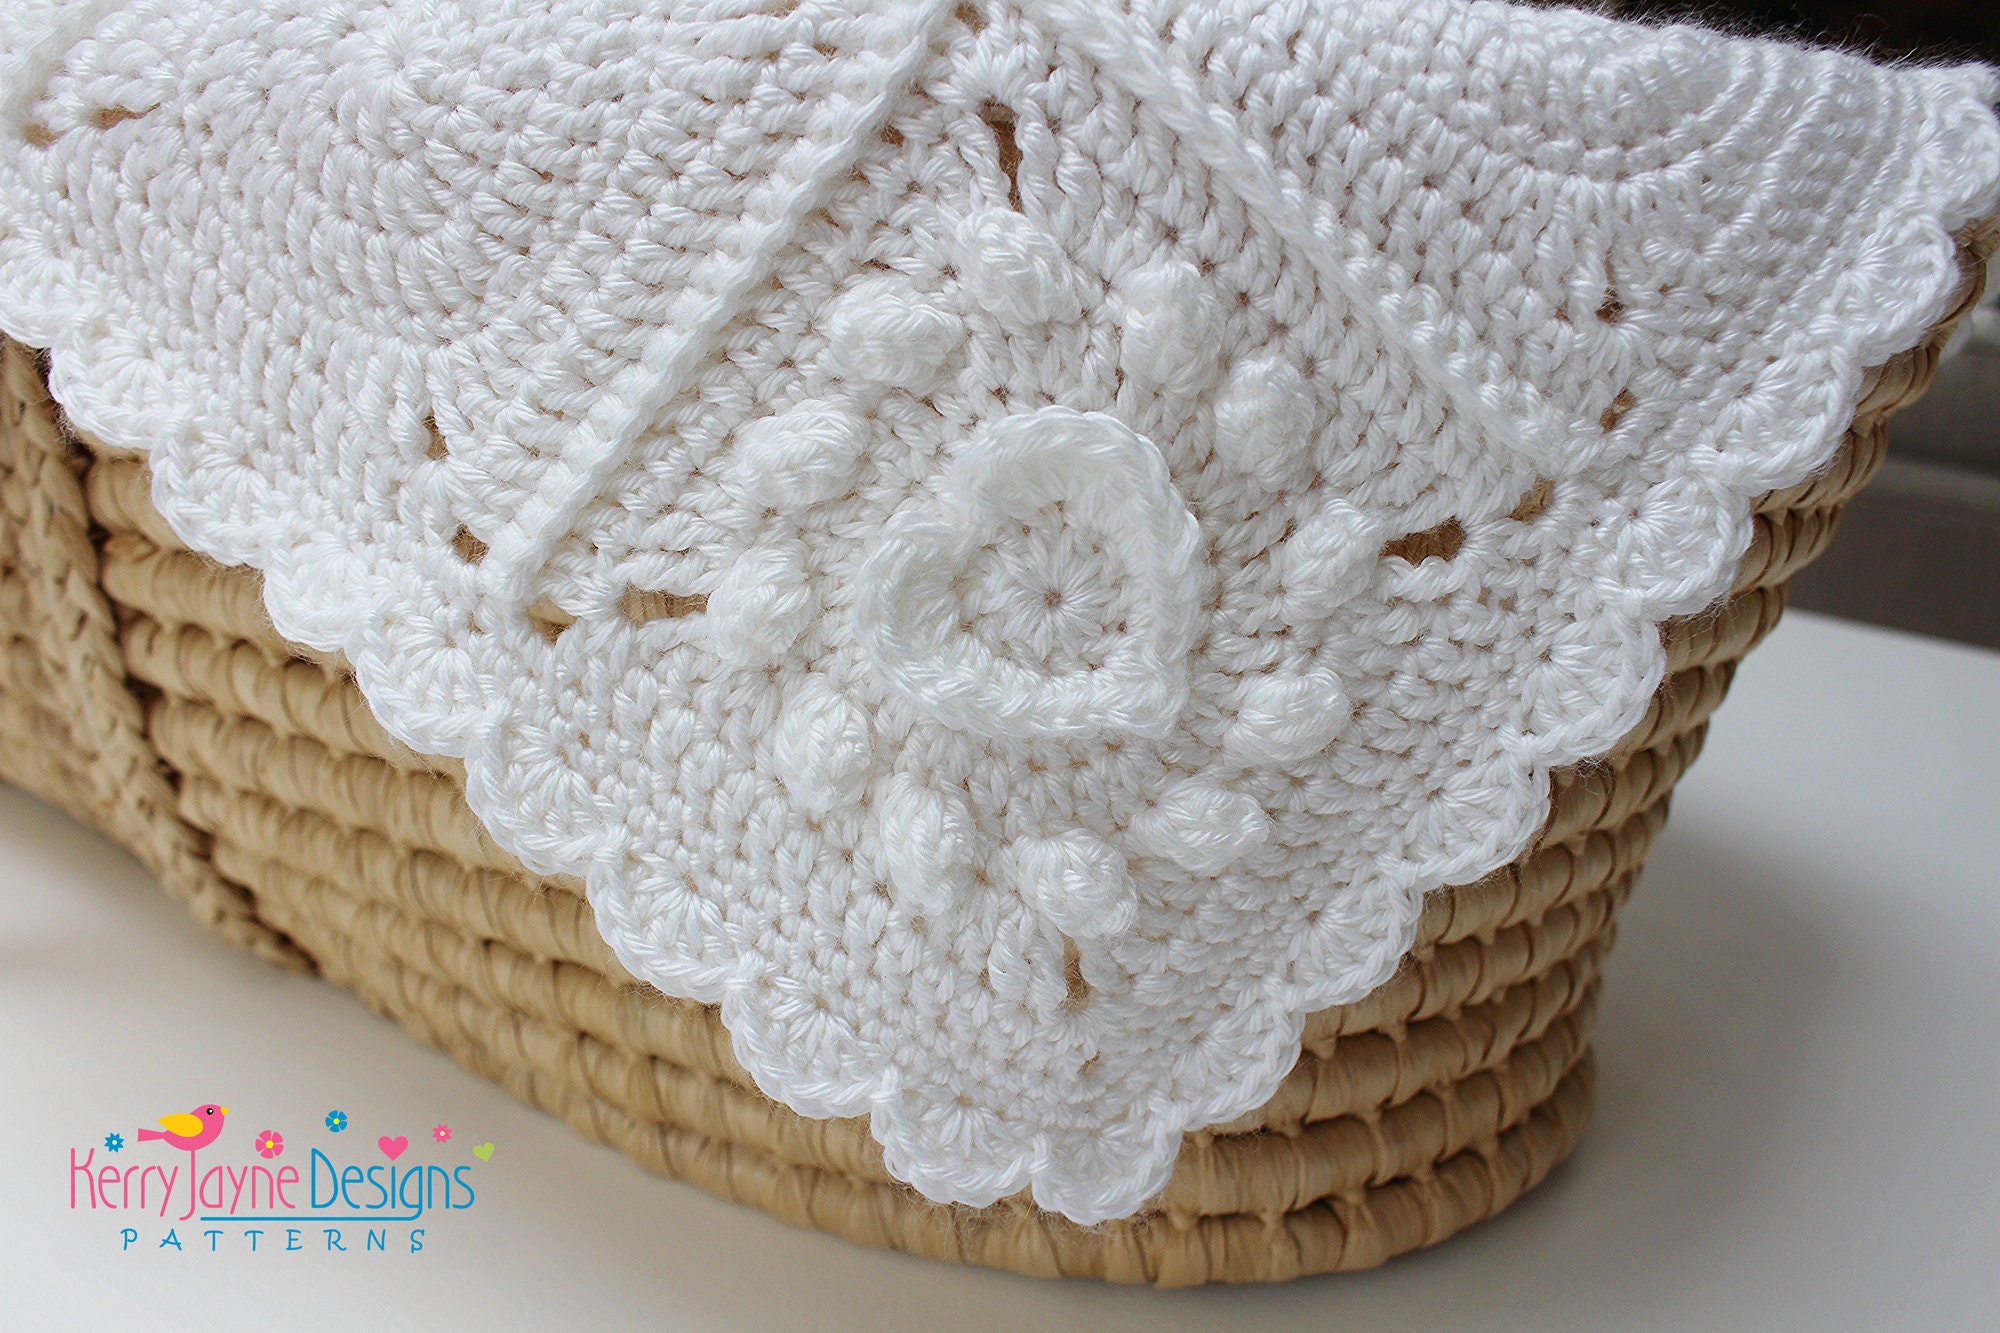 How To Crochet A Straight Granny Square – Kerry Jayne Designs Ltd